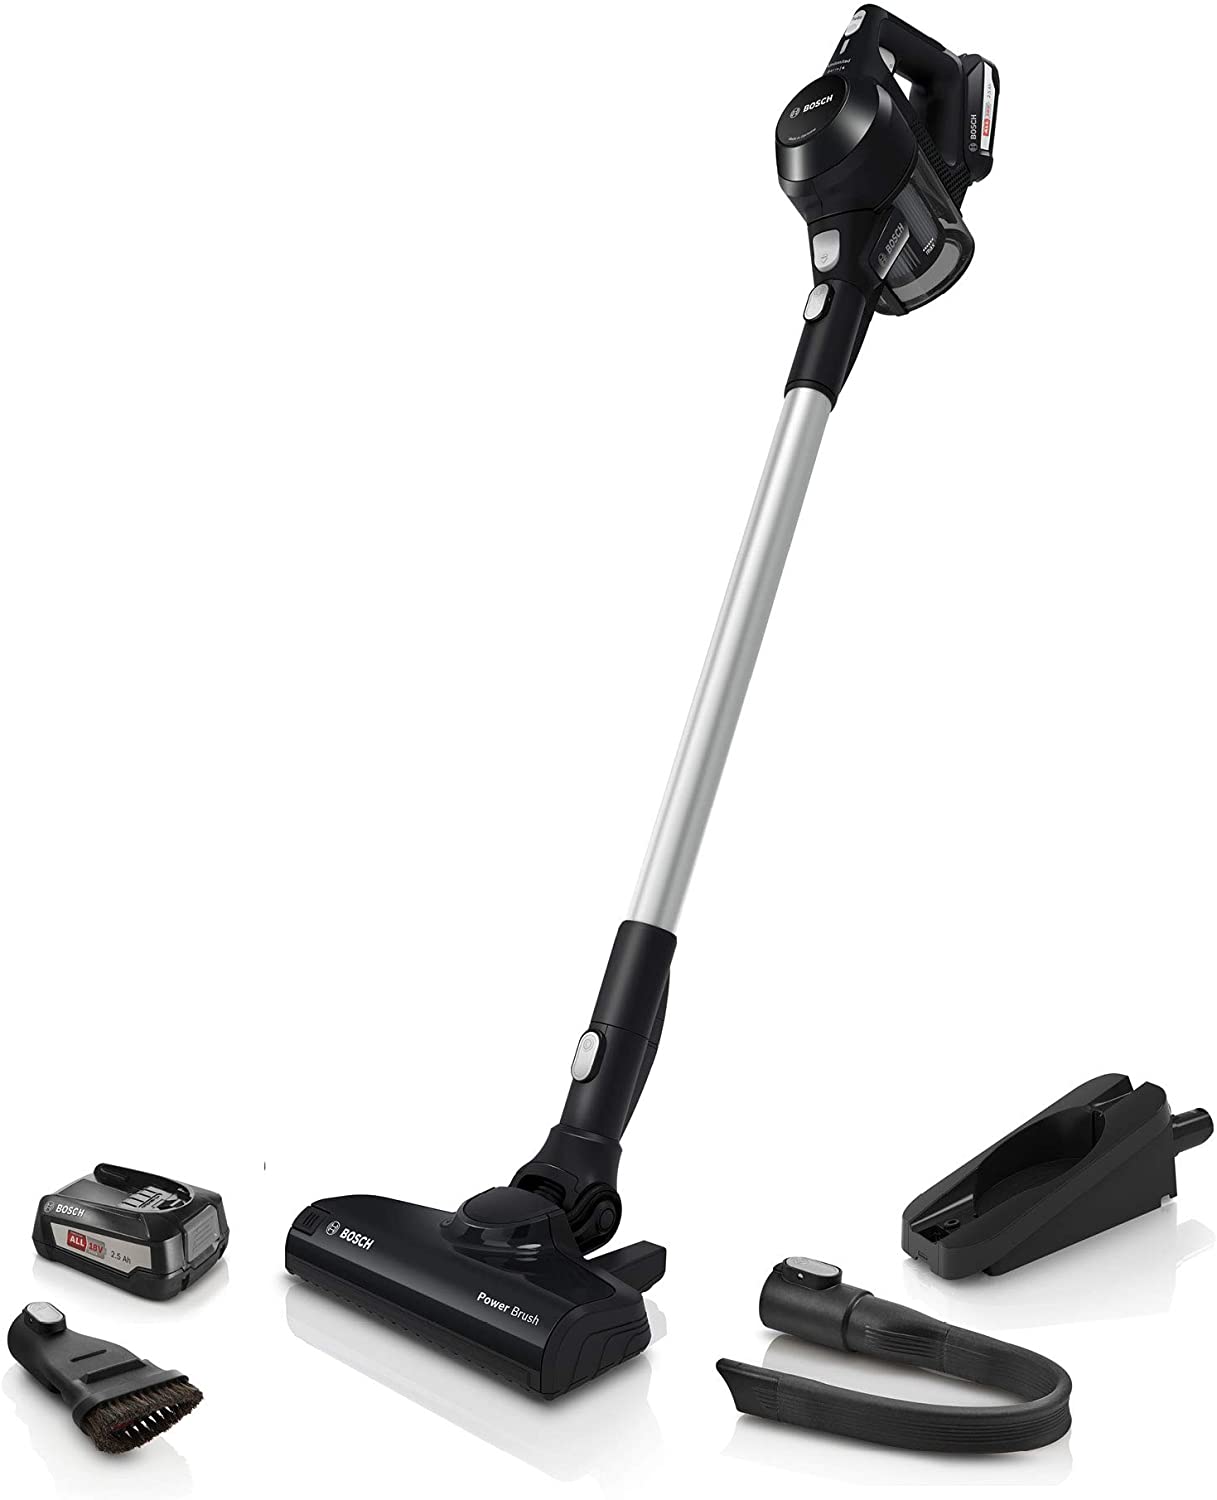 Bosch Hausgerate Bosch Unlimited 6 Series BCS611AM - Cordless broom vacuum cleaner, up to 30 minutes, 18 V, including 1 replaceable battery (Power for ALL), white